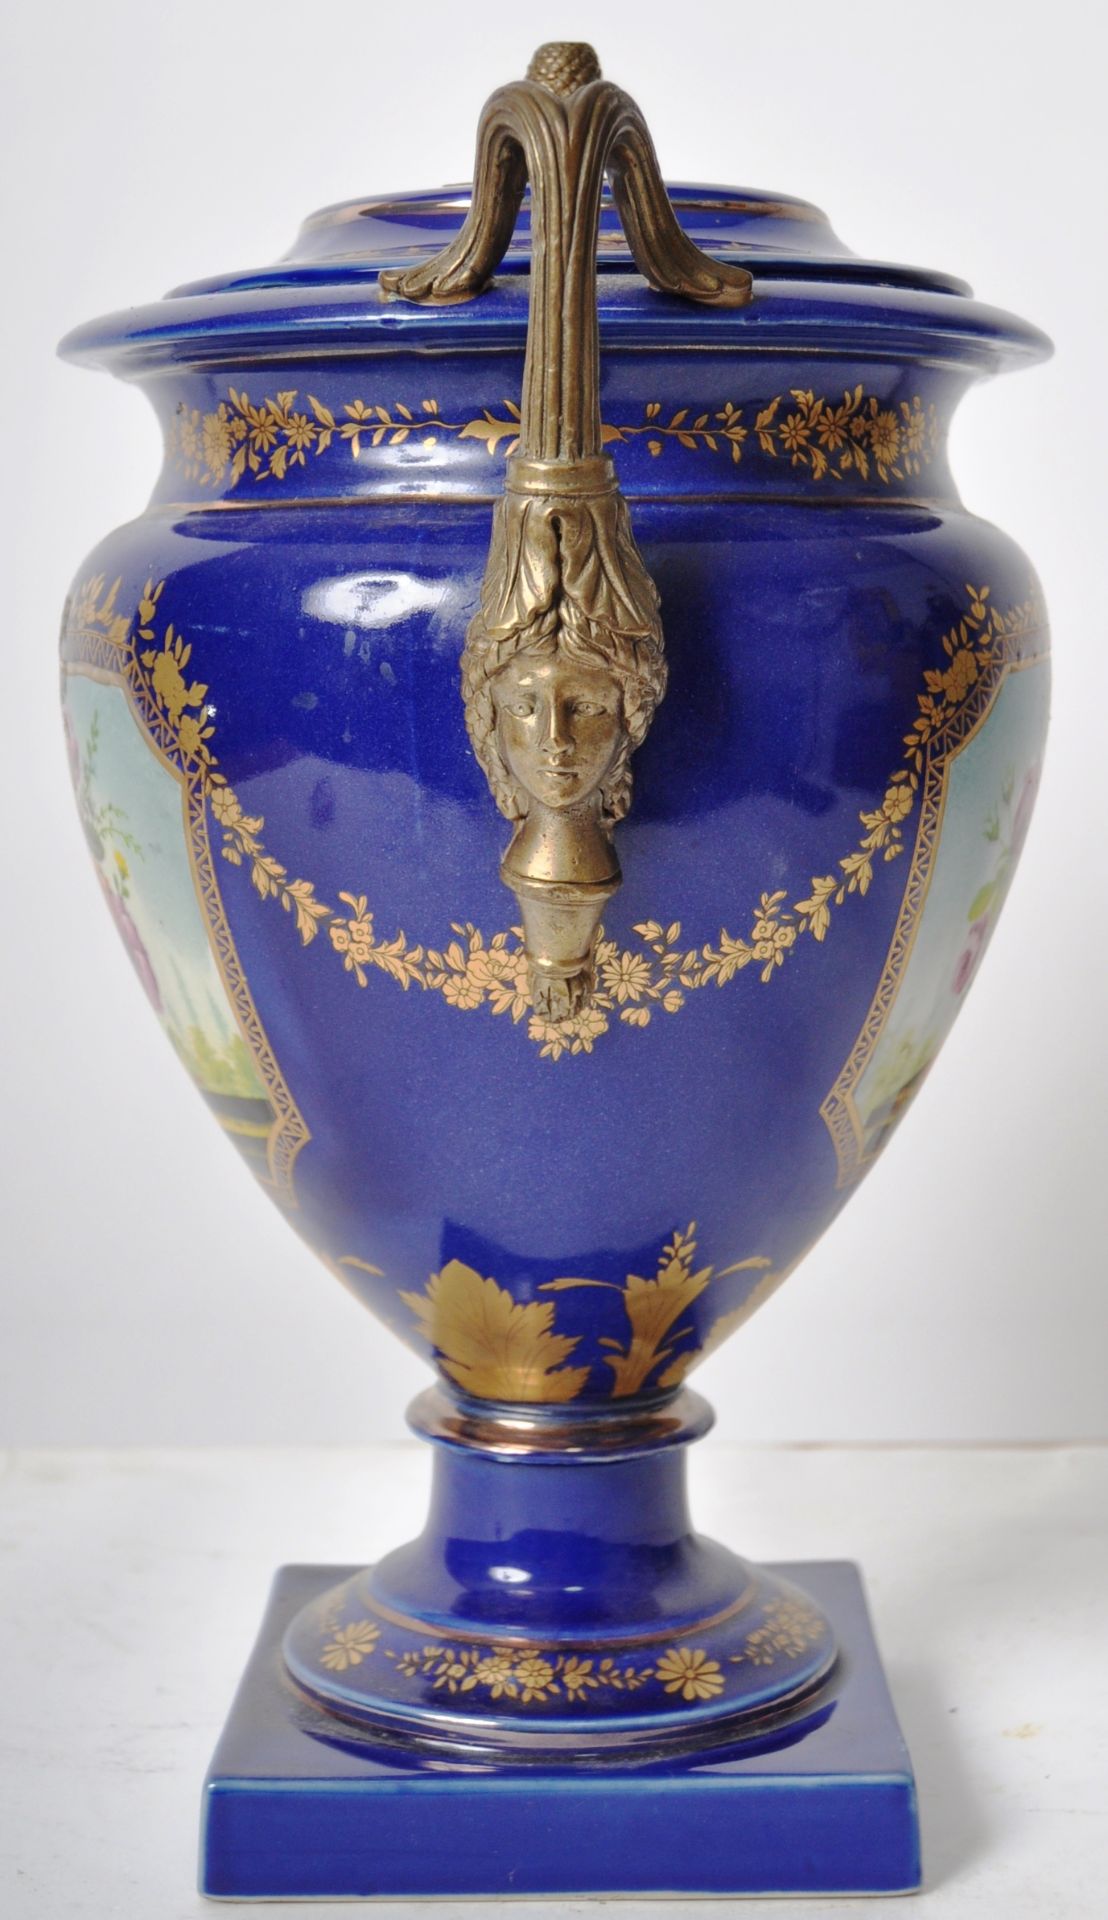 EARLY 20TH CENTURY PORCELAIN LIDDED URN - Image 5 of 11